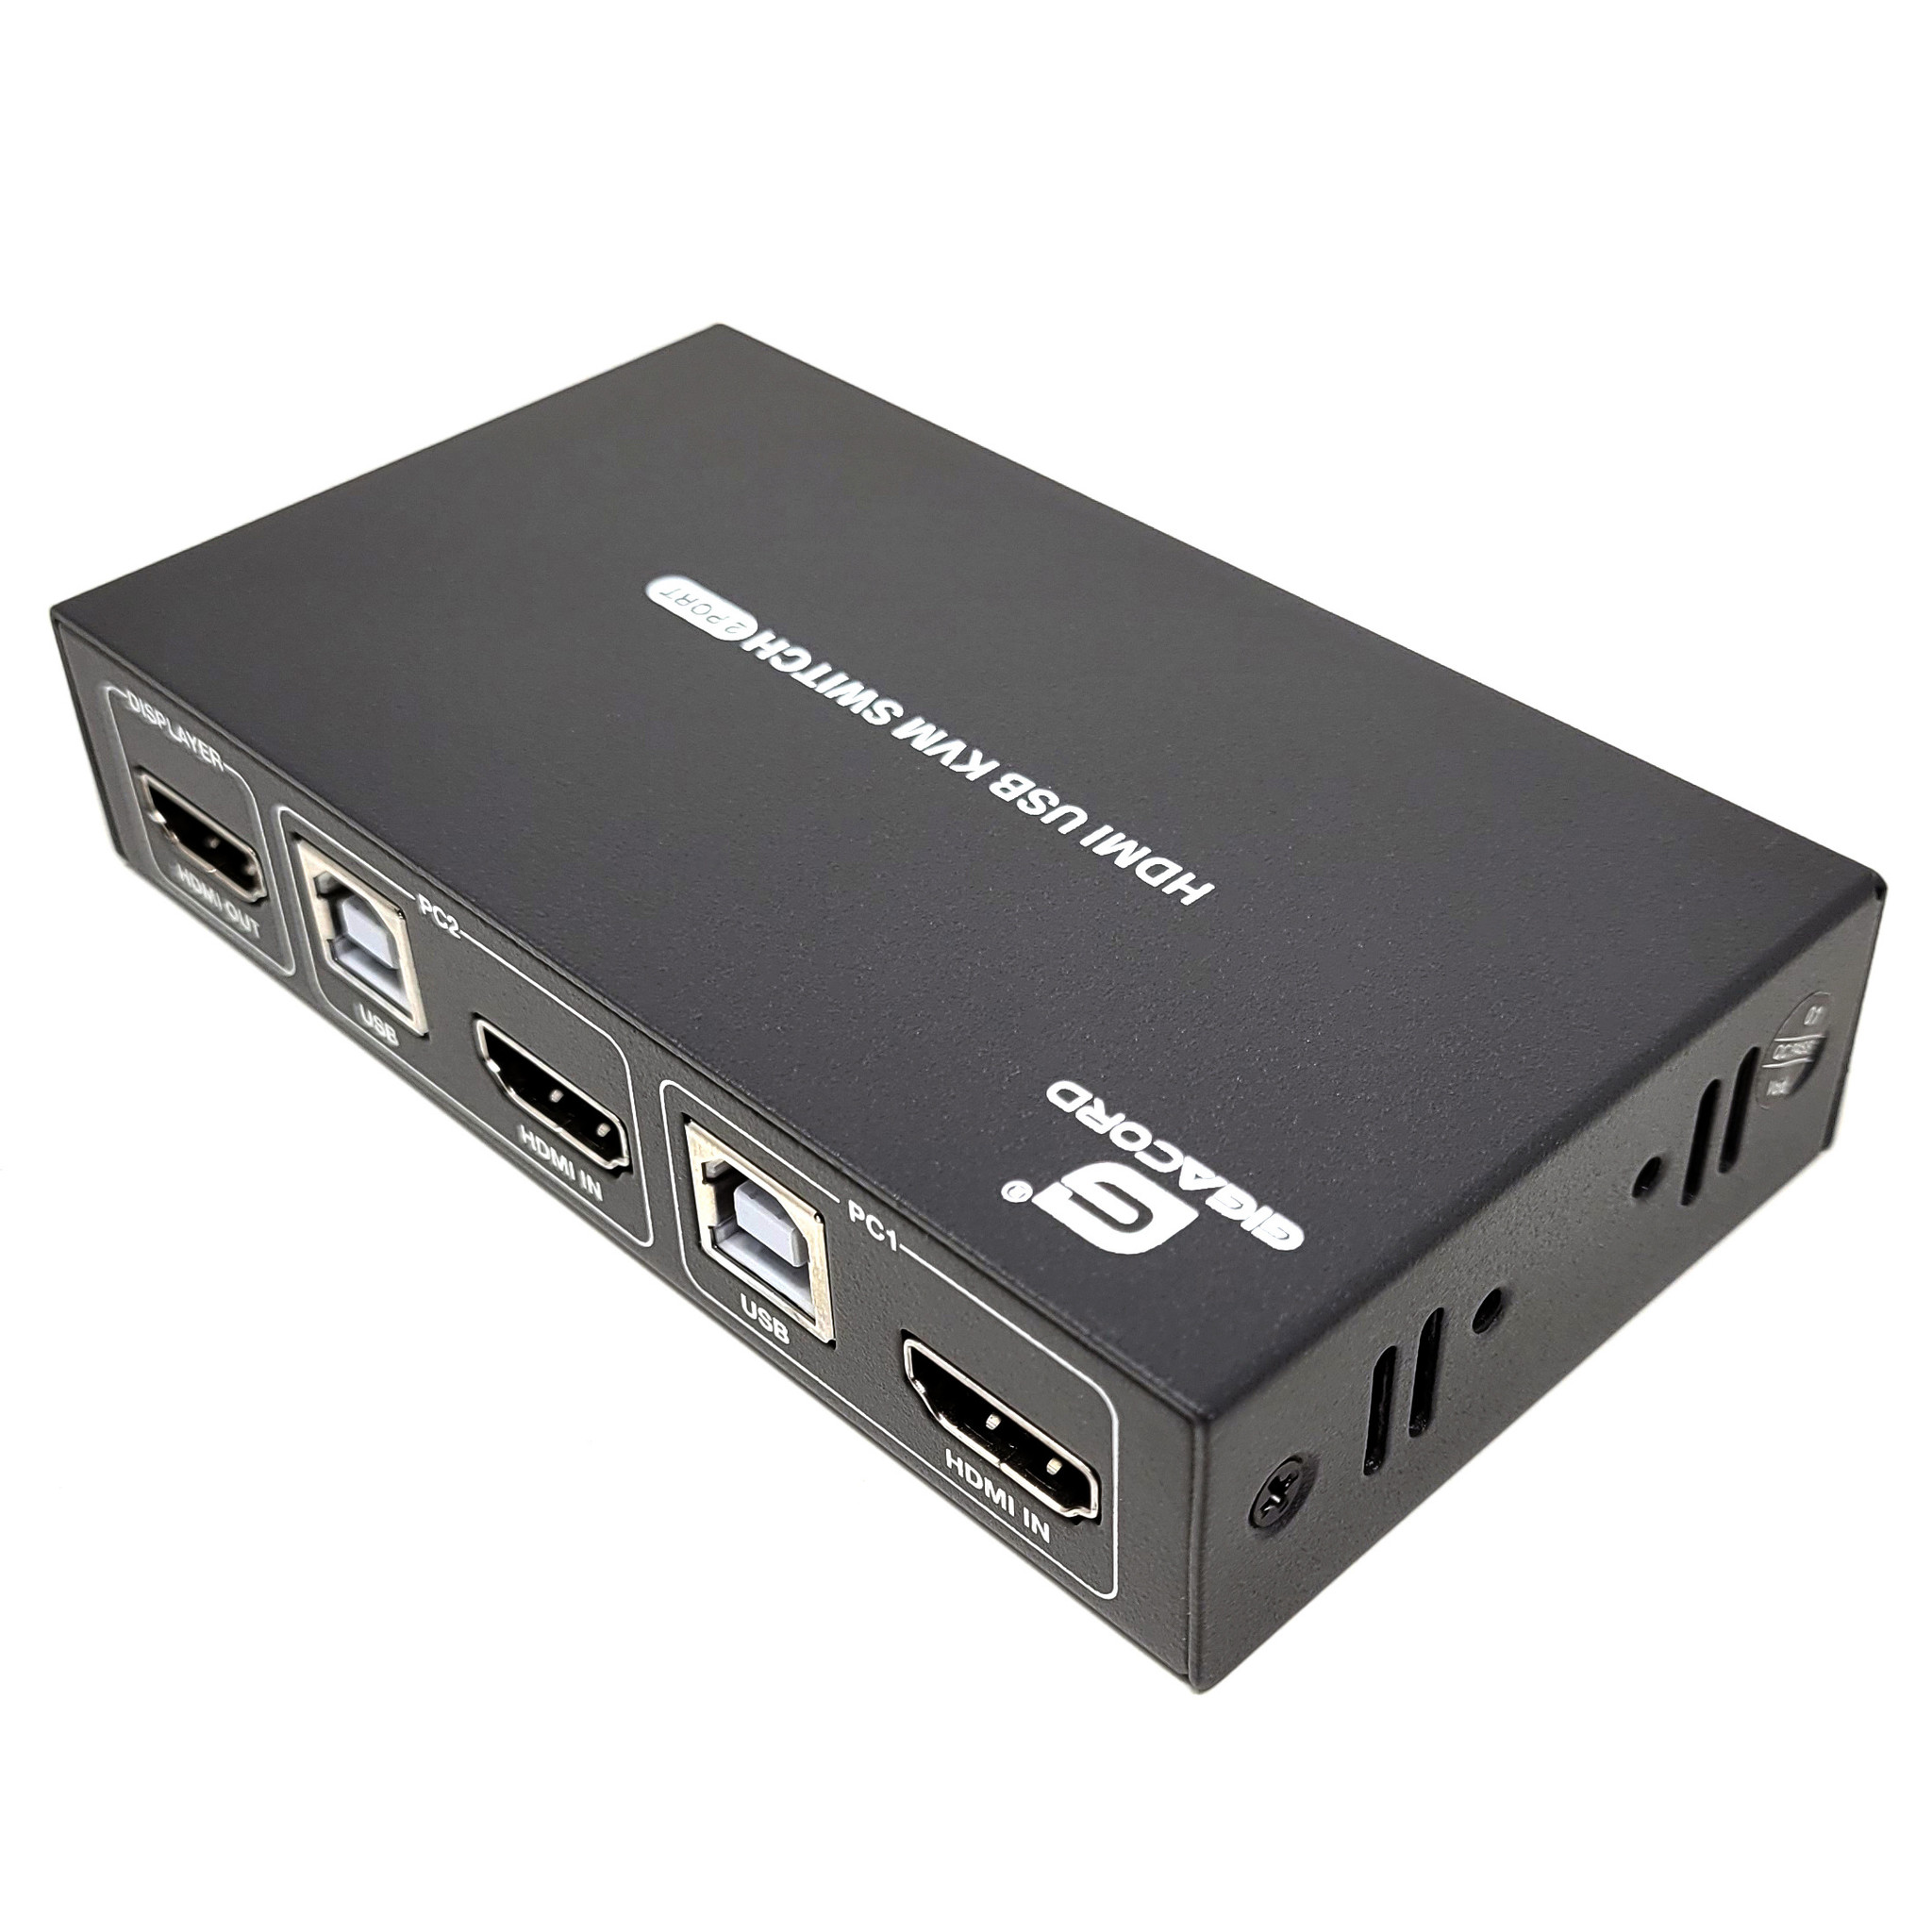 Gigacord KVM Switch HDMI 2 Port, 2 in 1 Out, UHD 4K@30Hz, 4 USB 2.0 Hub, No  Power Require, Compatible with Most Keyboards and Mouse, Button Switch -  NWCA Inc.